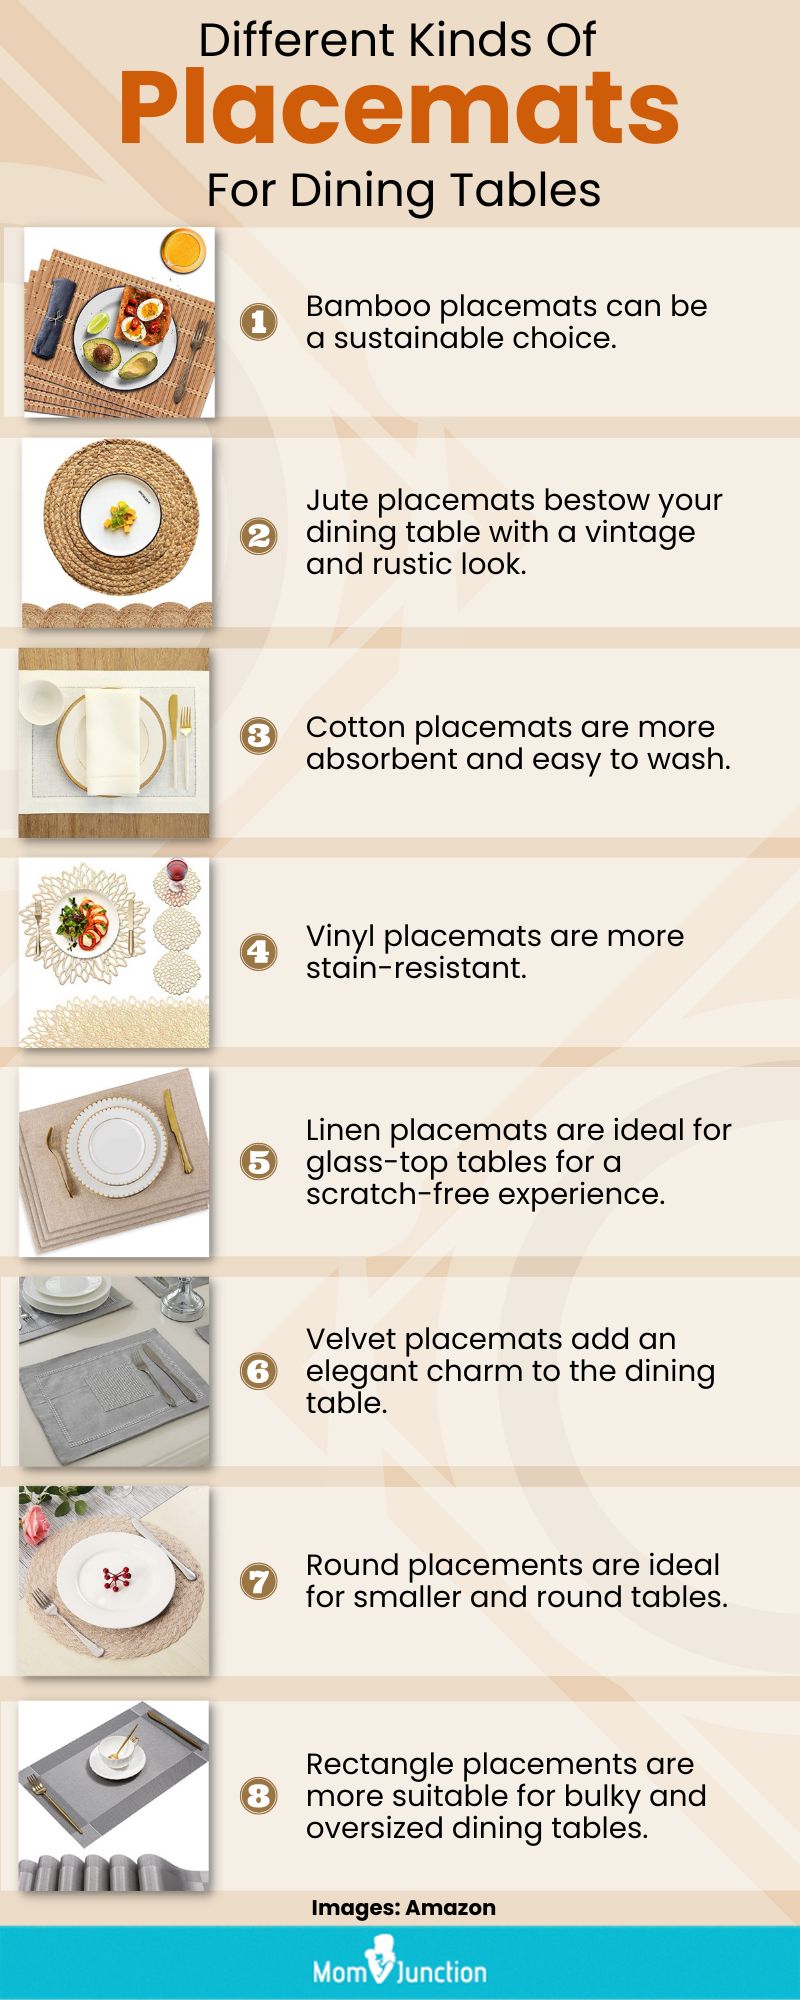 https://www.momjunction.com/wp-content/uploads/2023/02/Different-Kinds-Of-Placemats-For-Dining-Tables.jpg